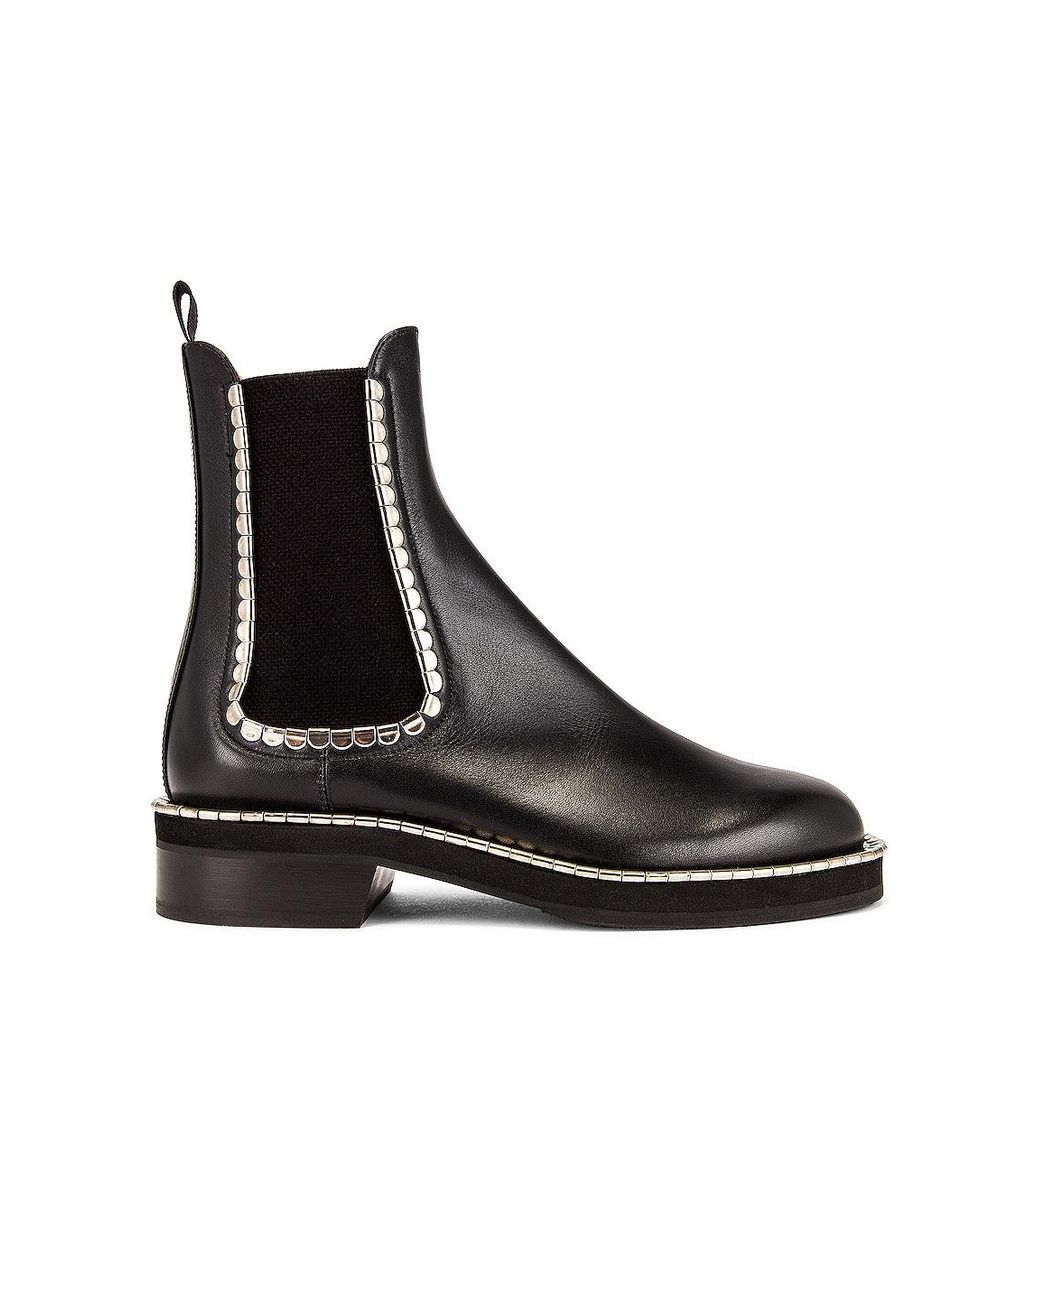 Chloé Idol Ankle Boots in Black | Lyst